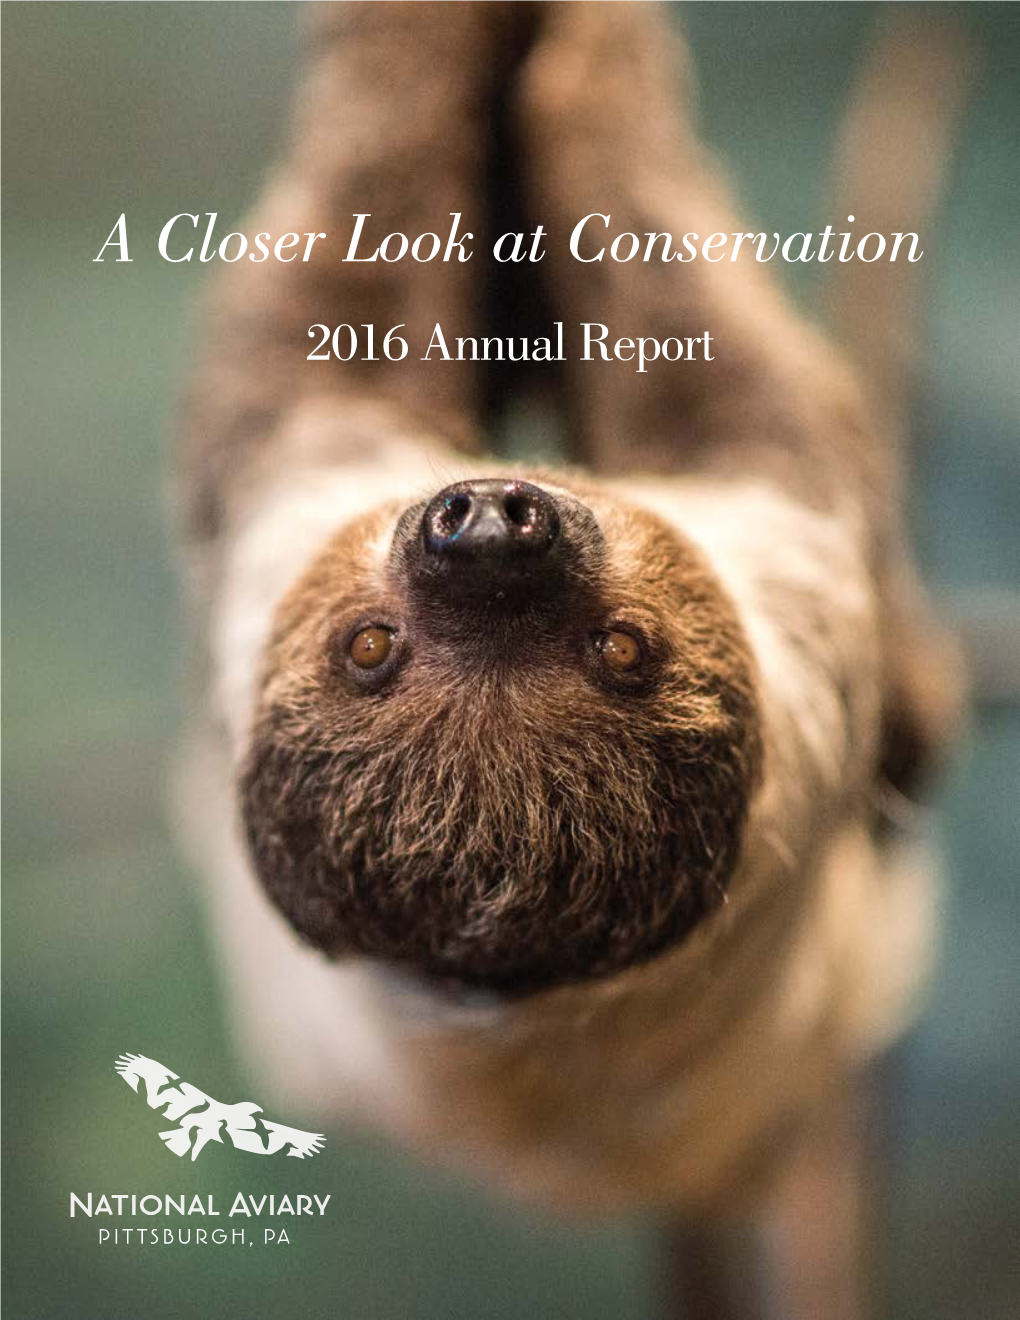 National Aviary's 2016 Annual Report